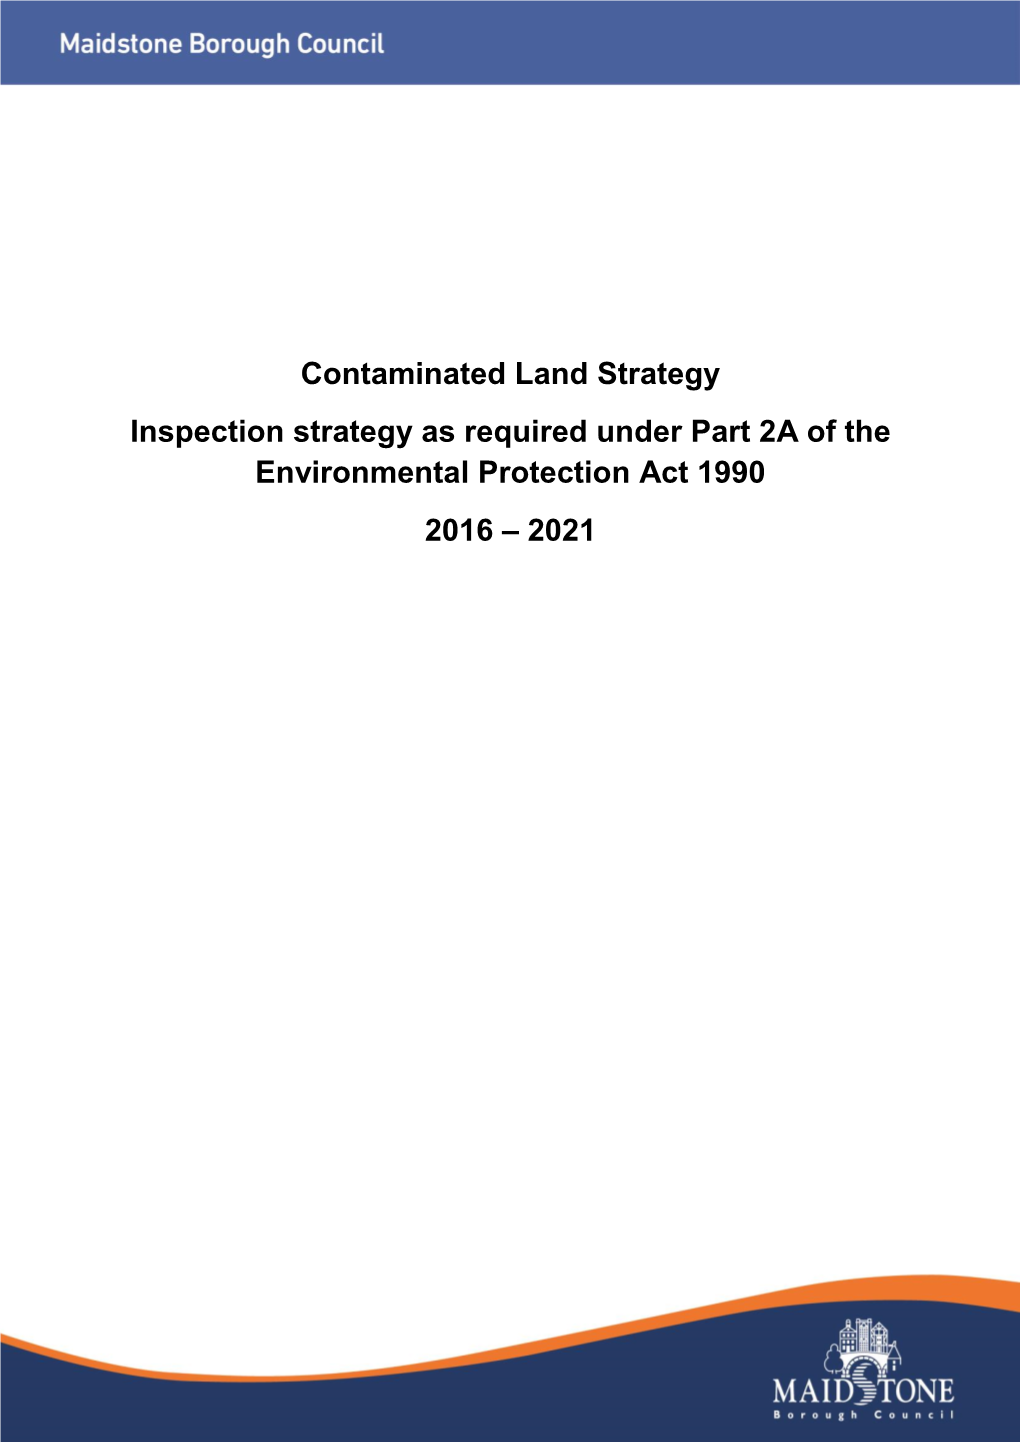 Contaminated Land Strategy Inspection Strategy As Required Under Part 2A of the Environmental Protection Act 1990 2016 – 2021